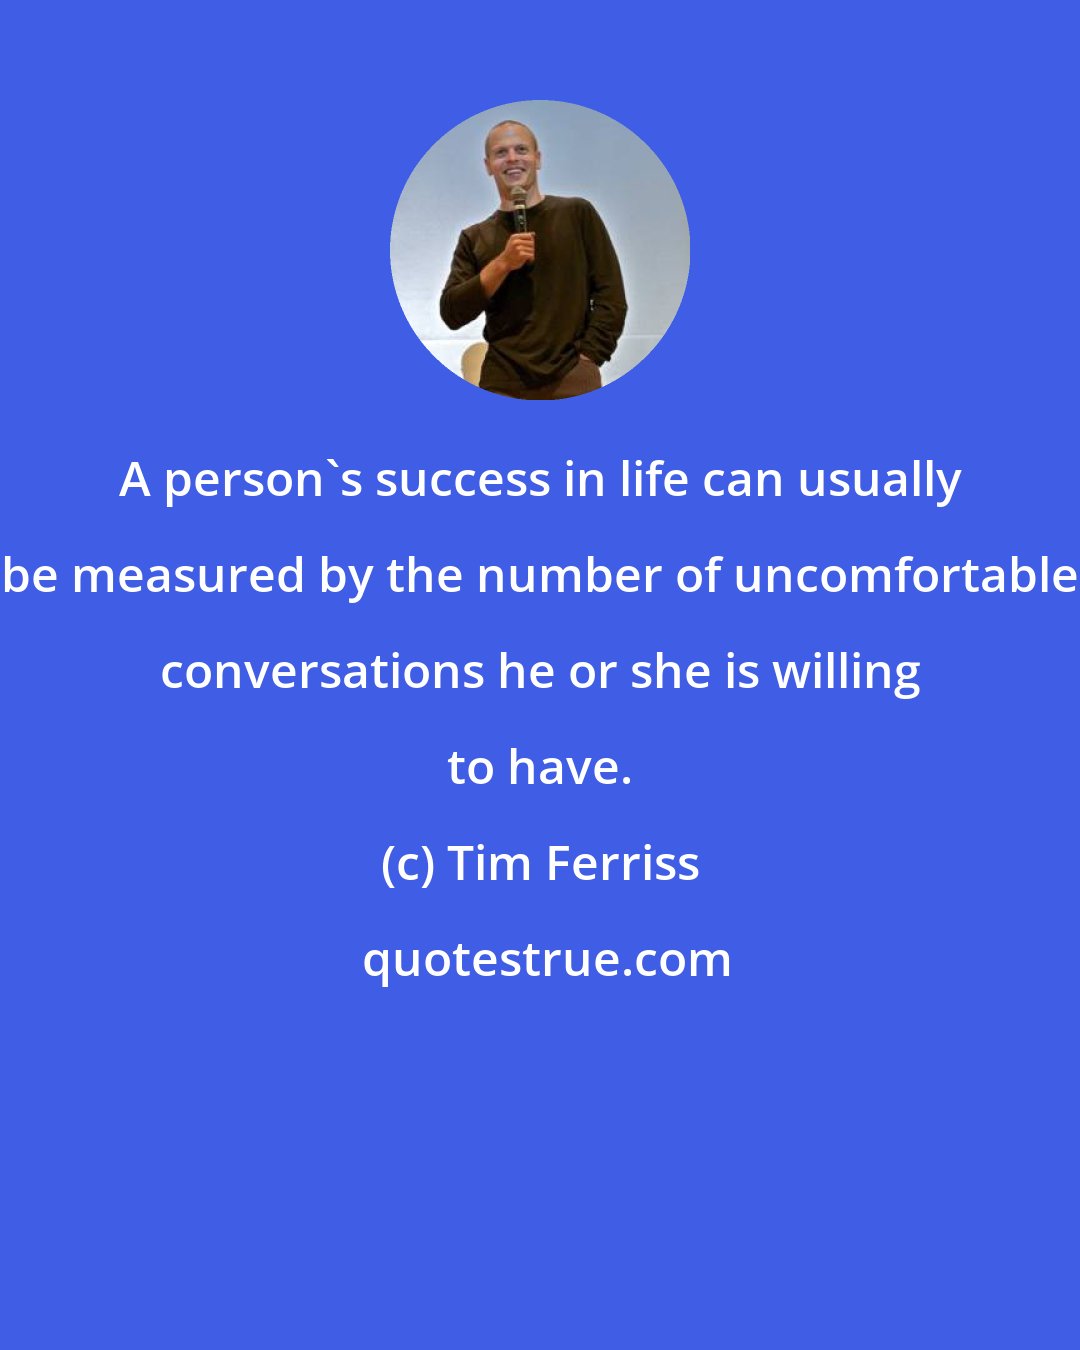 Tim Ferriss: A person's success in life can usually be measured by the number of uncomfortable conversations he or she is willing to have.